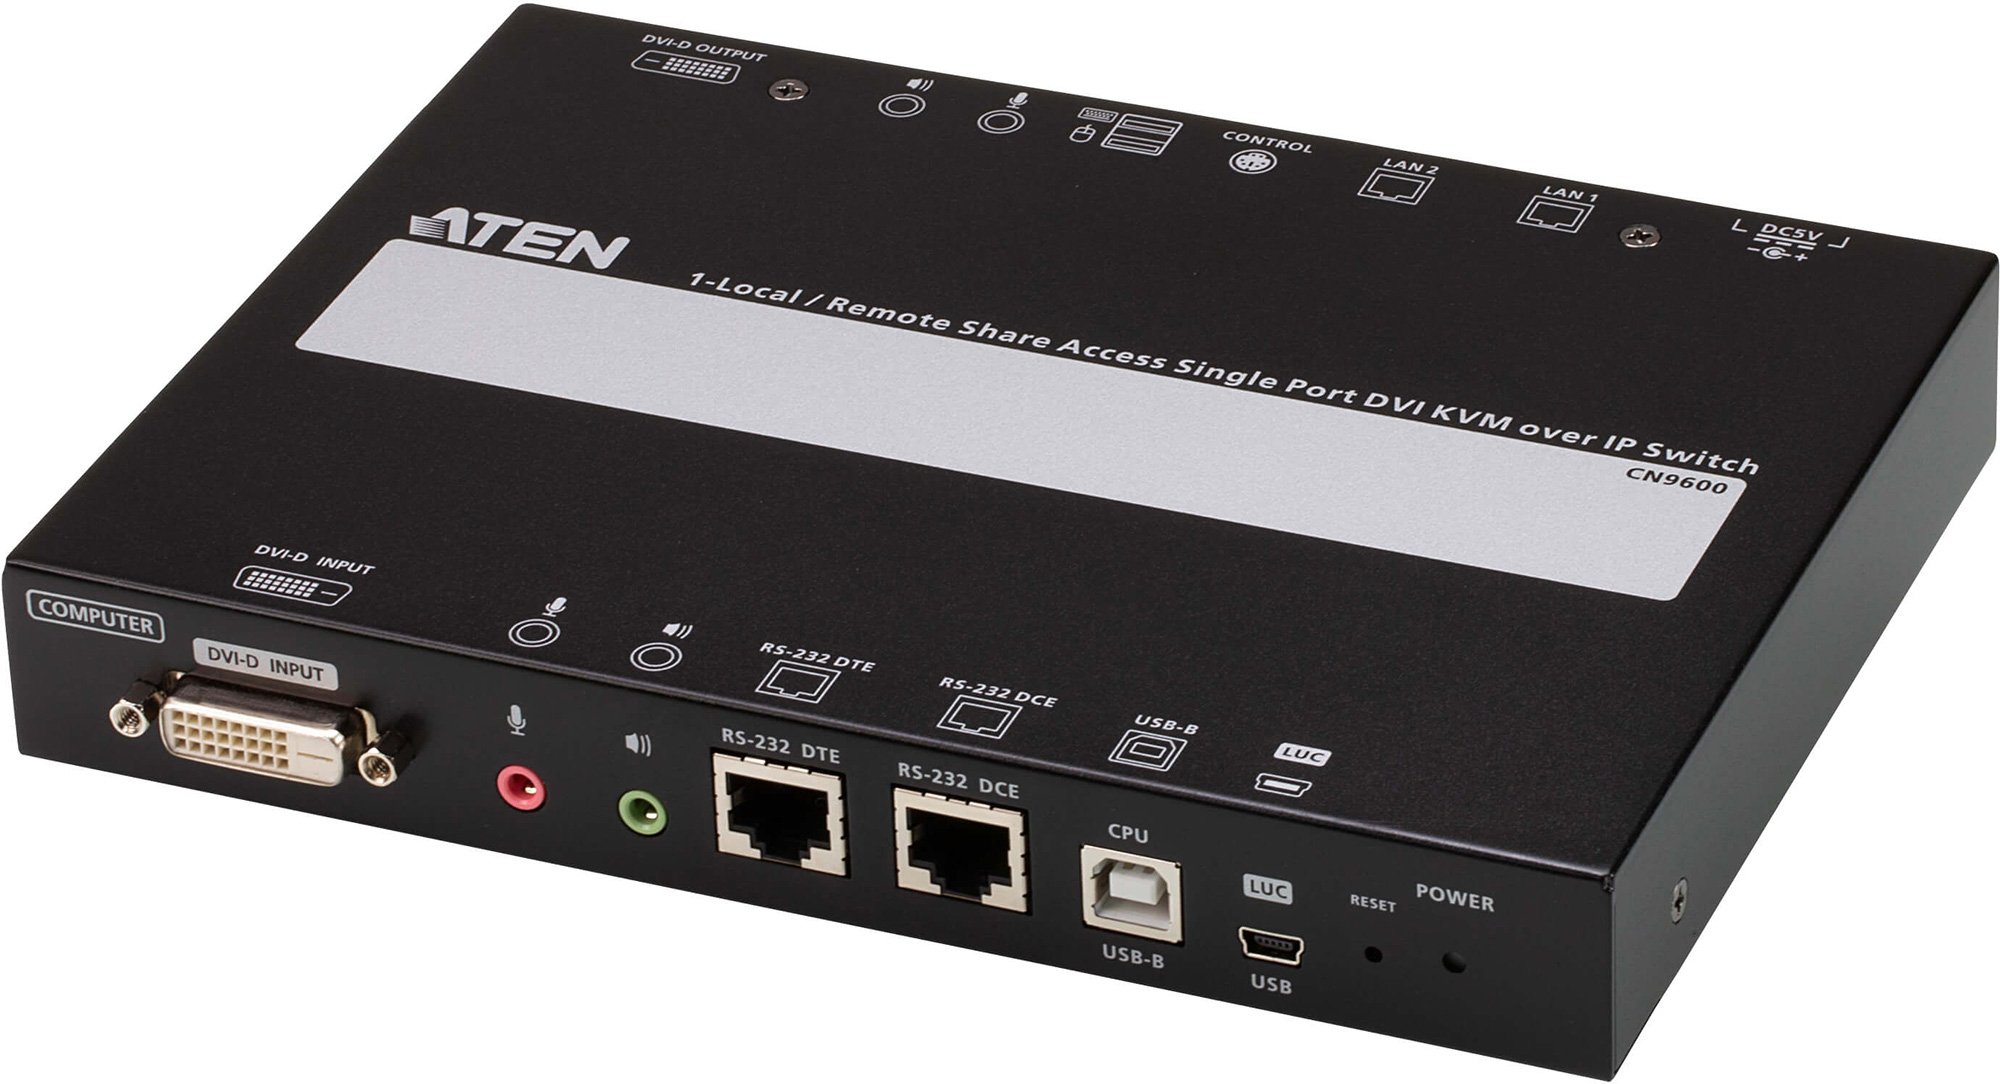 Aten CN9600 1-Local/Remote Share Access Single Port DVI KVM over IP Switch with KVM Cable and Mounting Kit ATEN-CN9600